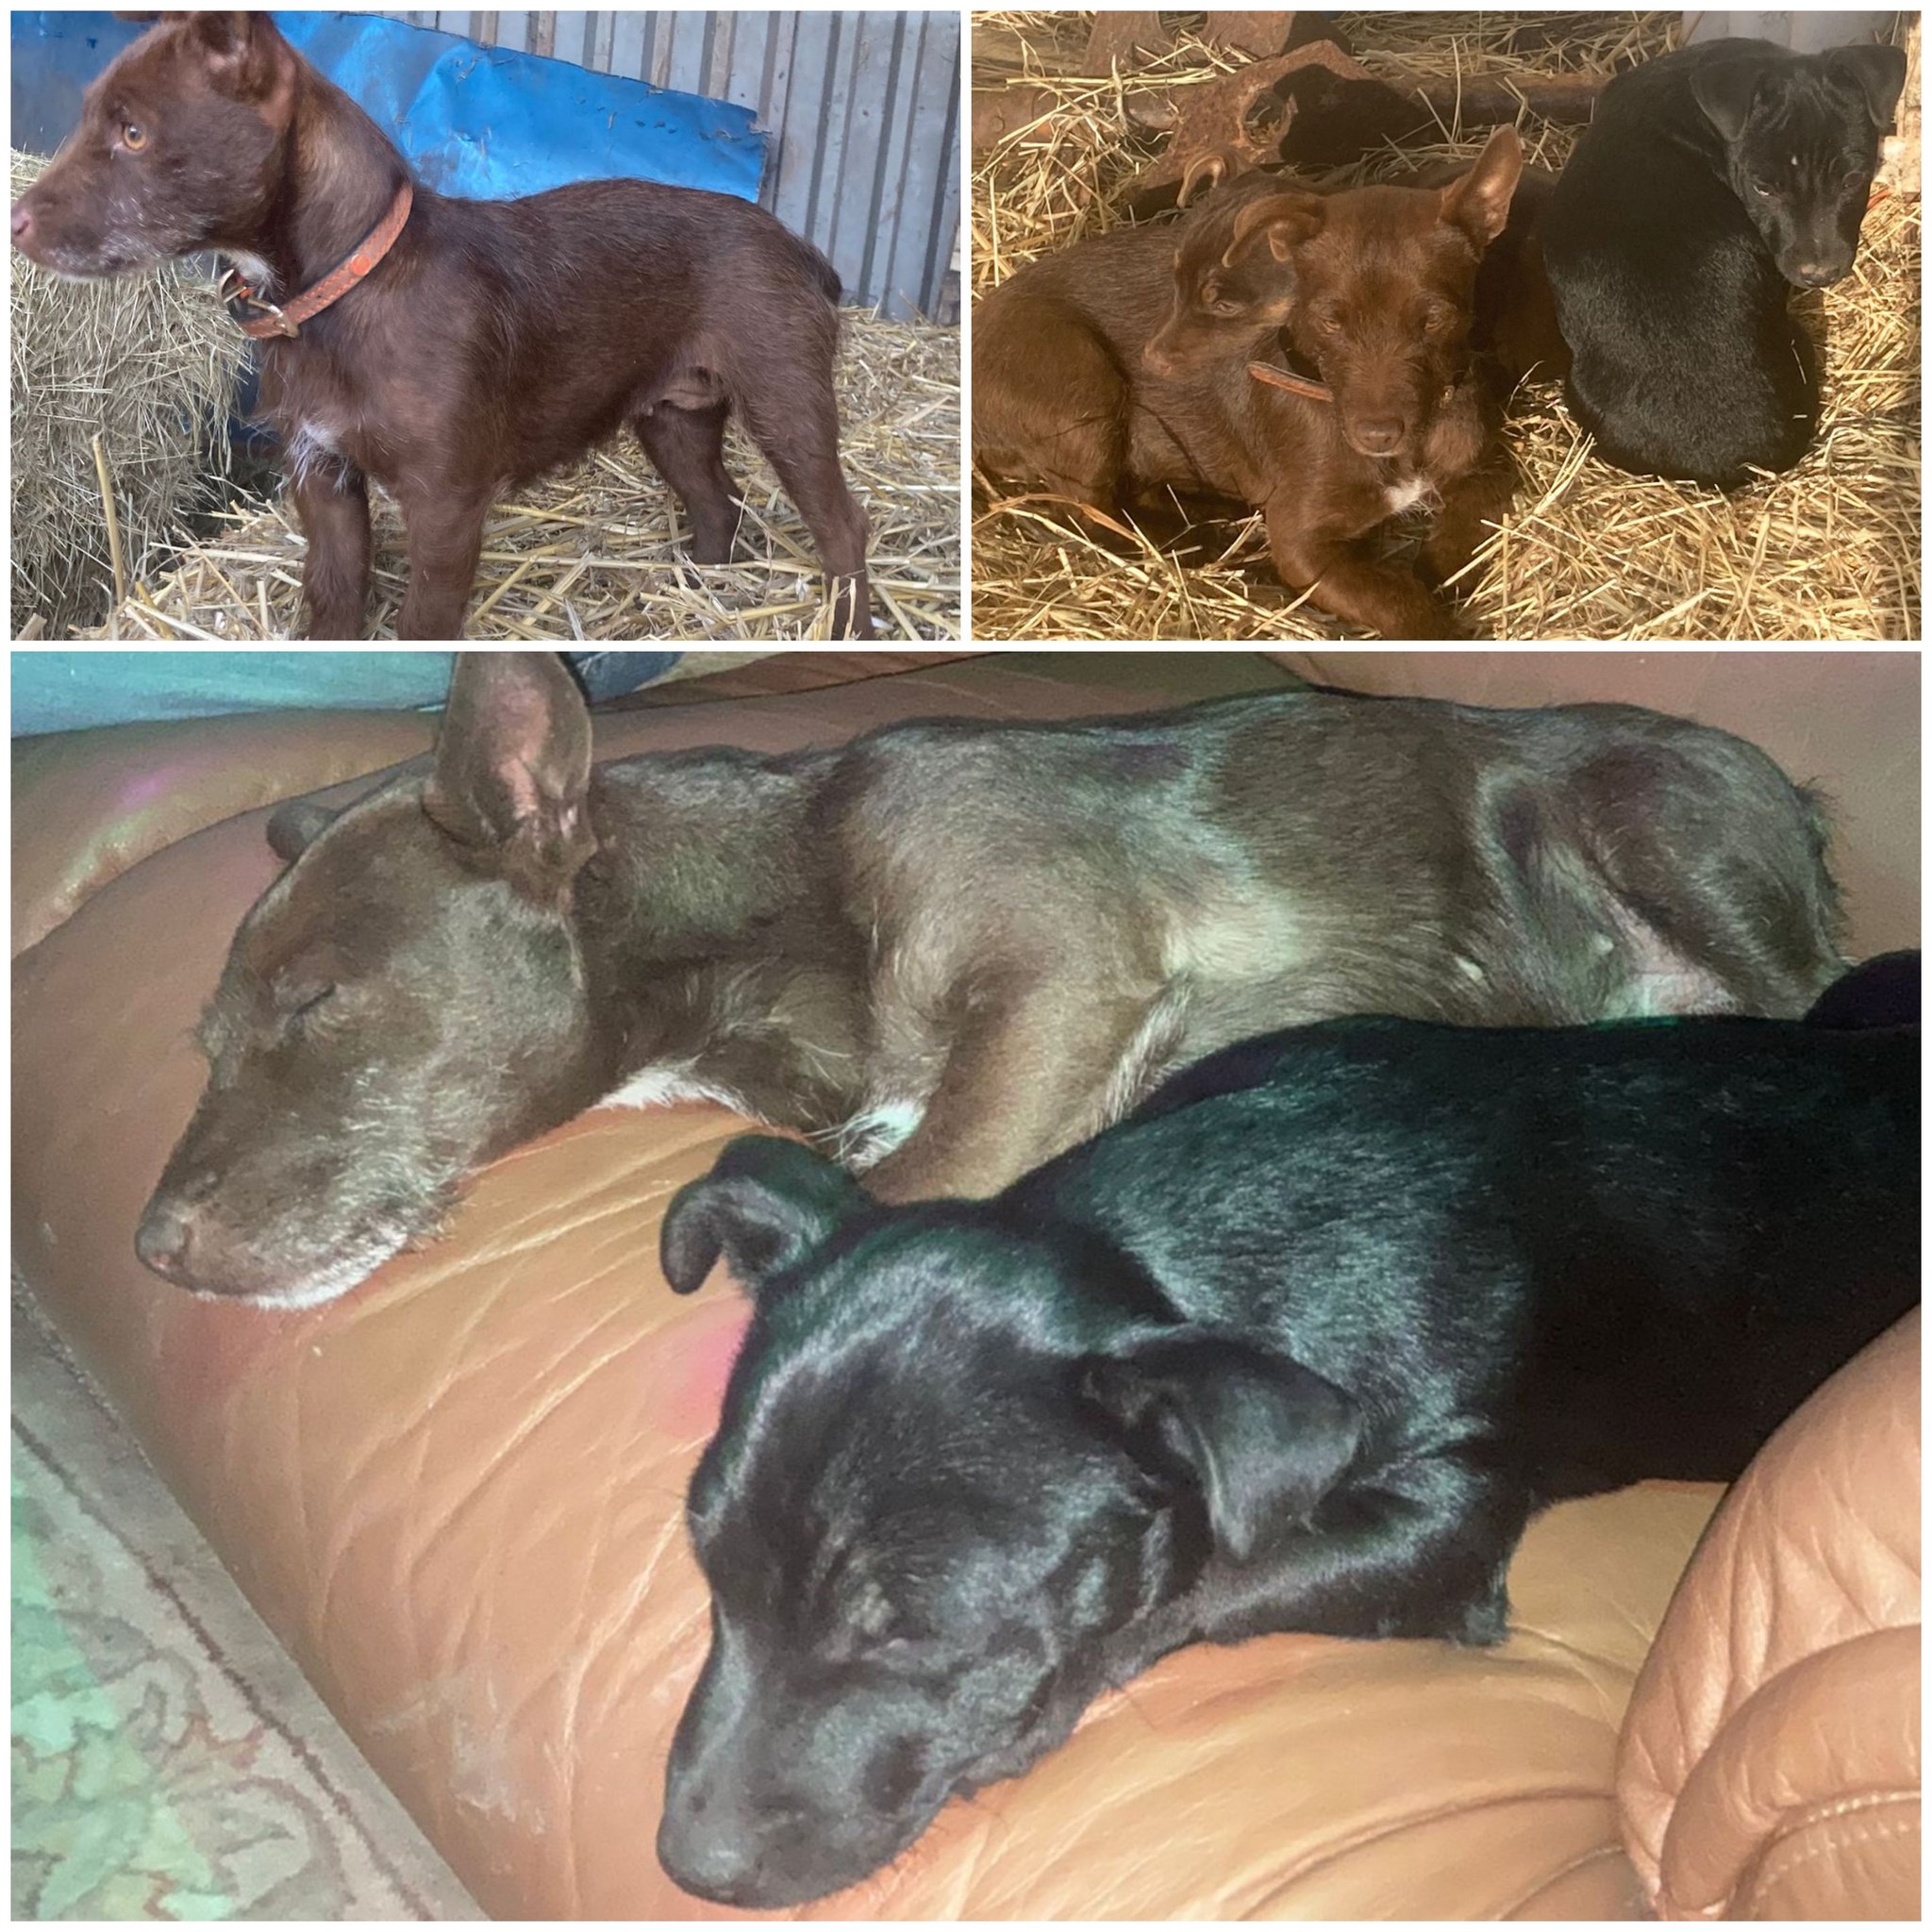 NEWS | Police launch appeal to help find two missing dogs from Herefordshire